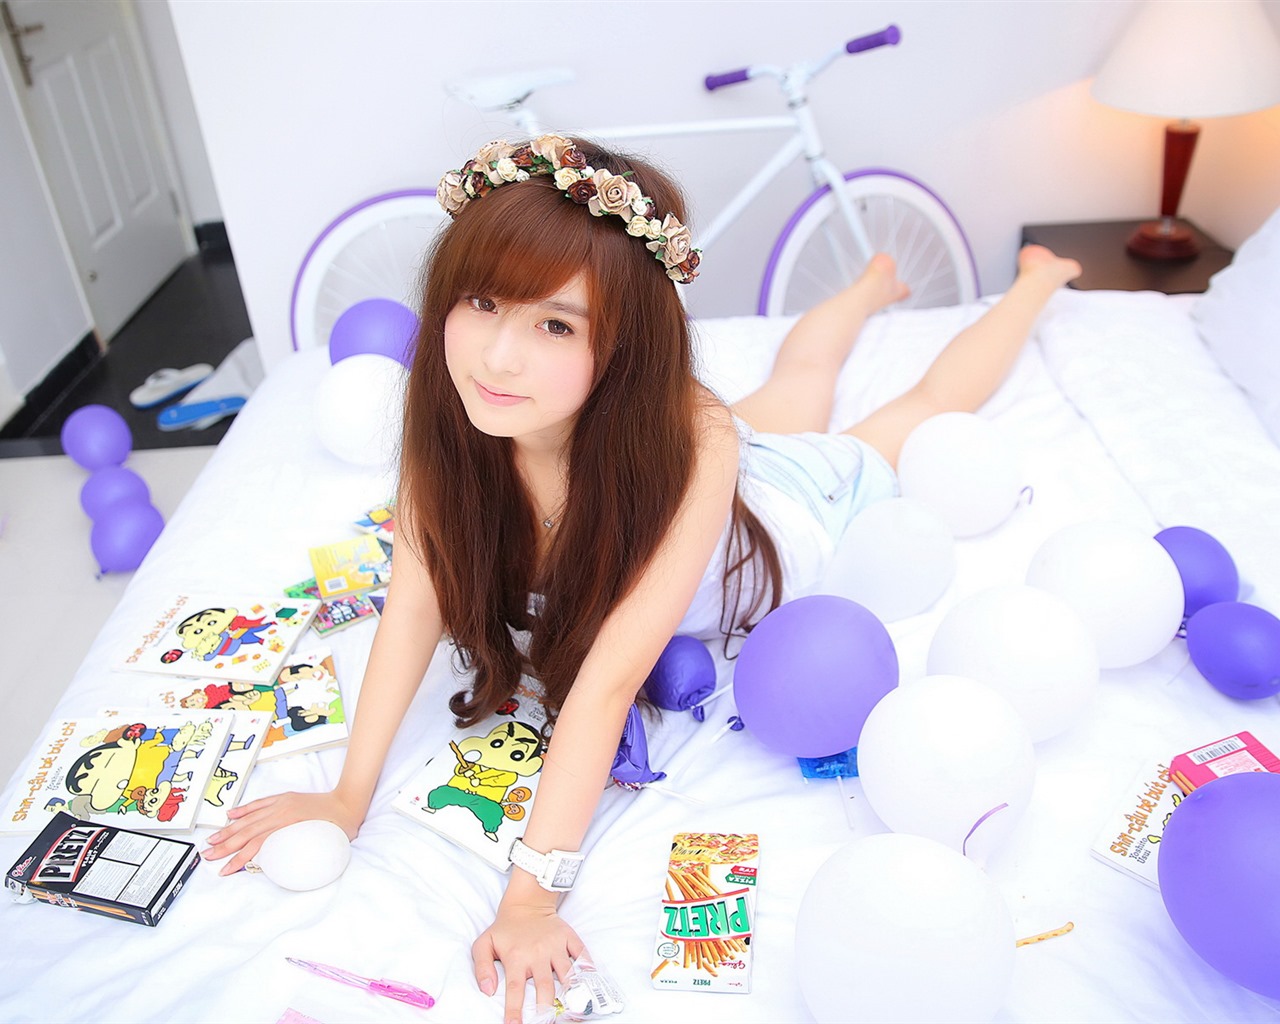 Pure and lovely young Asian girl HD wallpapers collection (5) #21 - 1280x1024